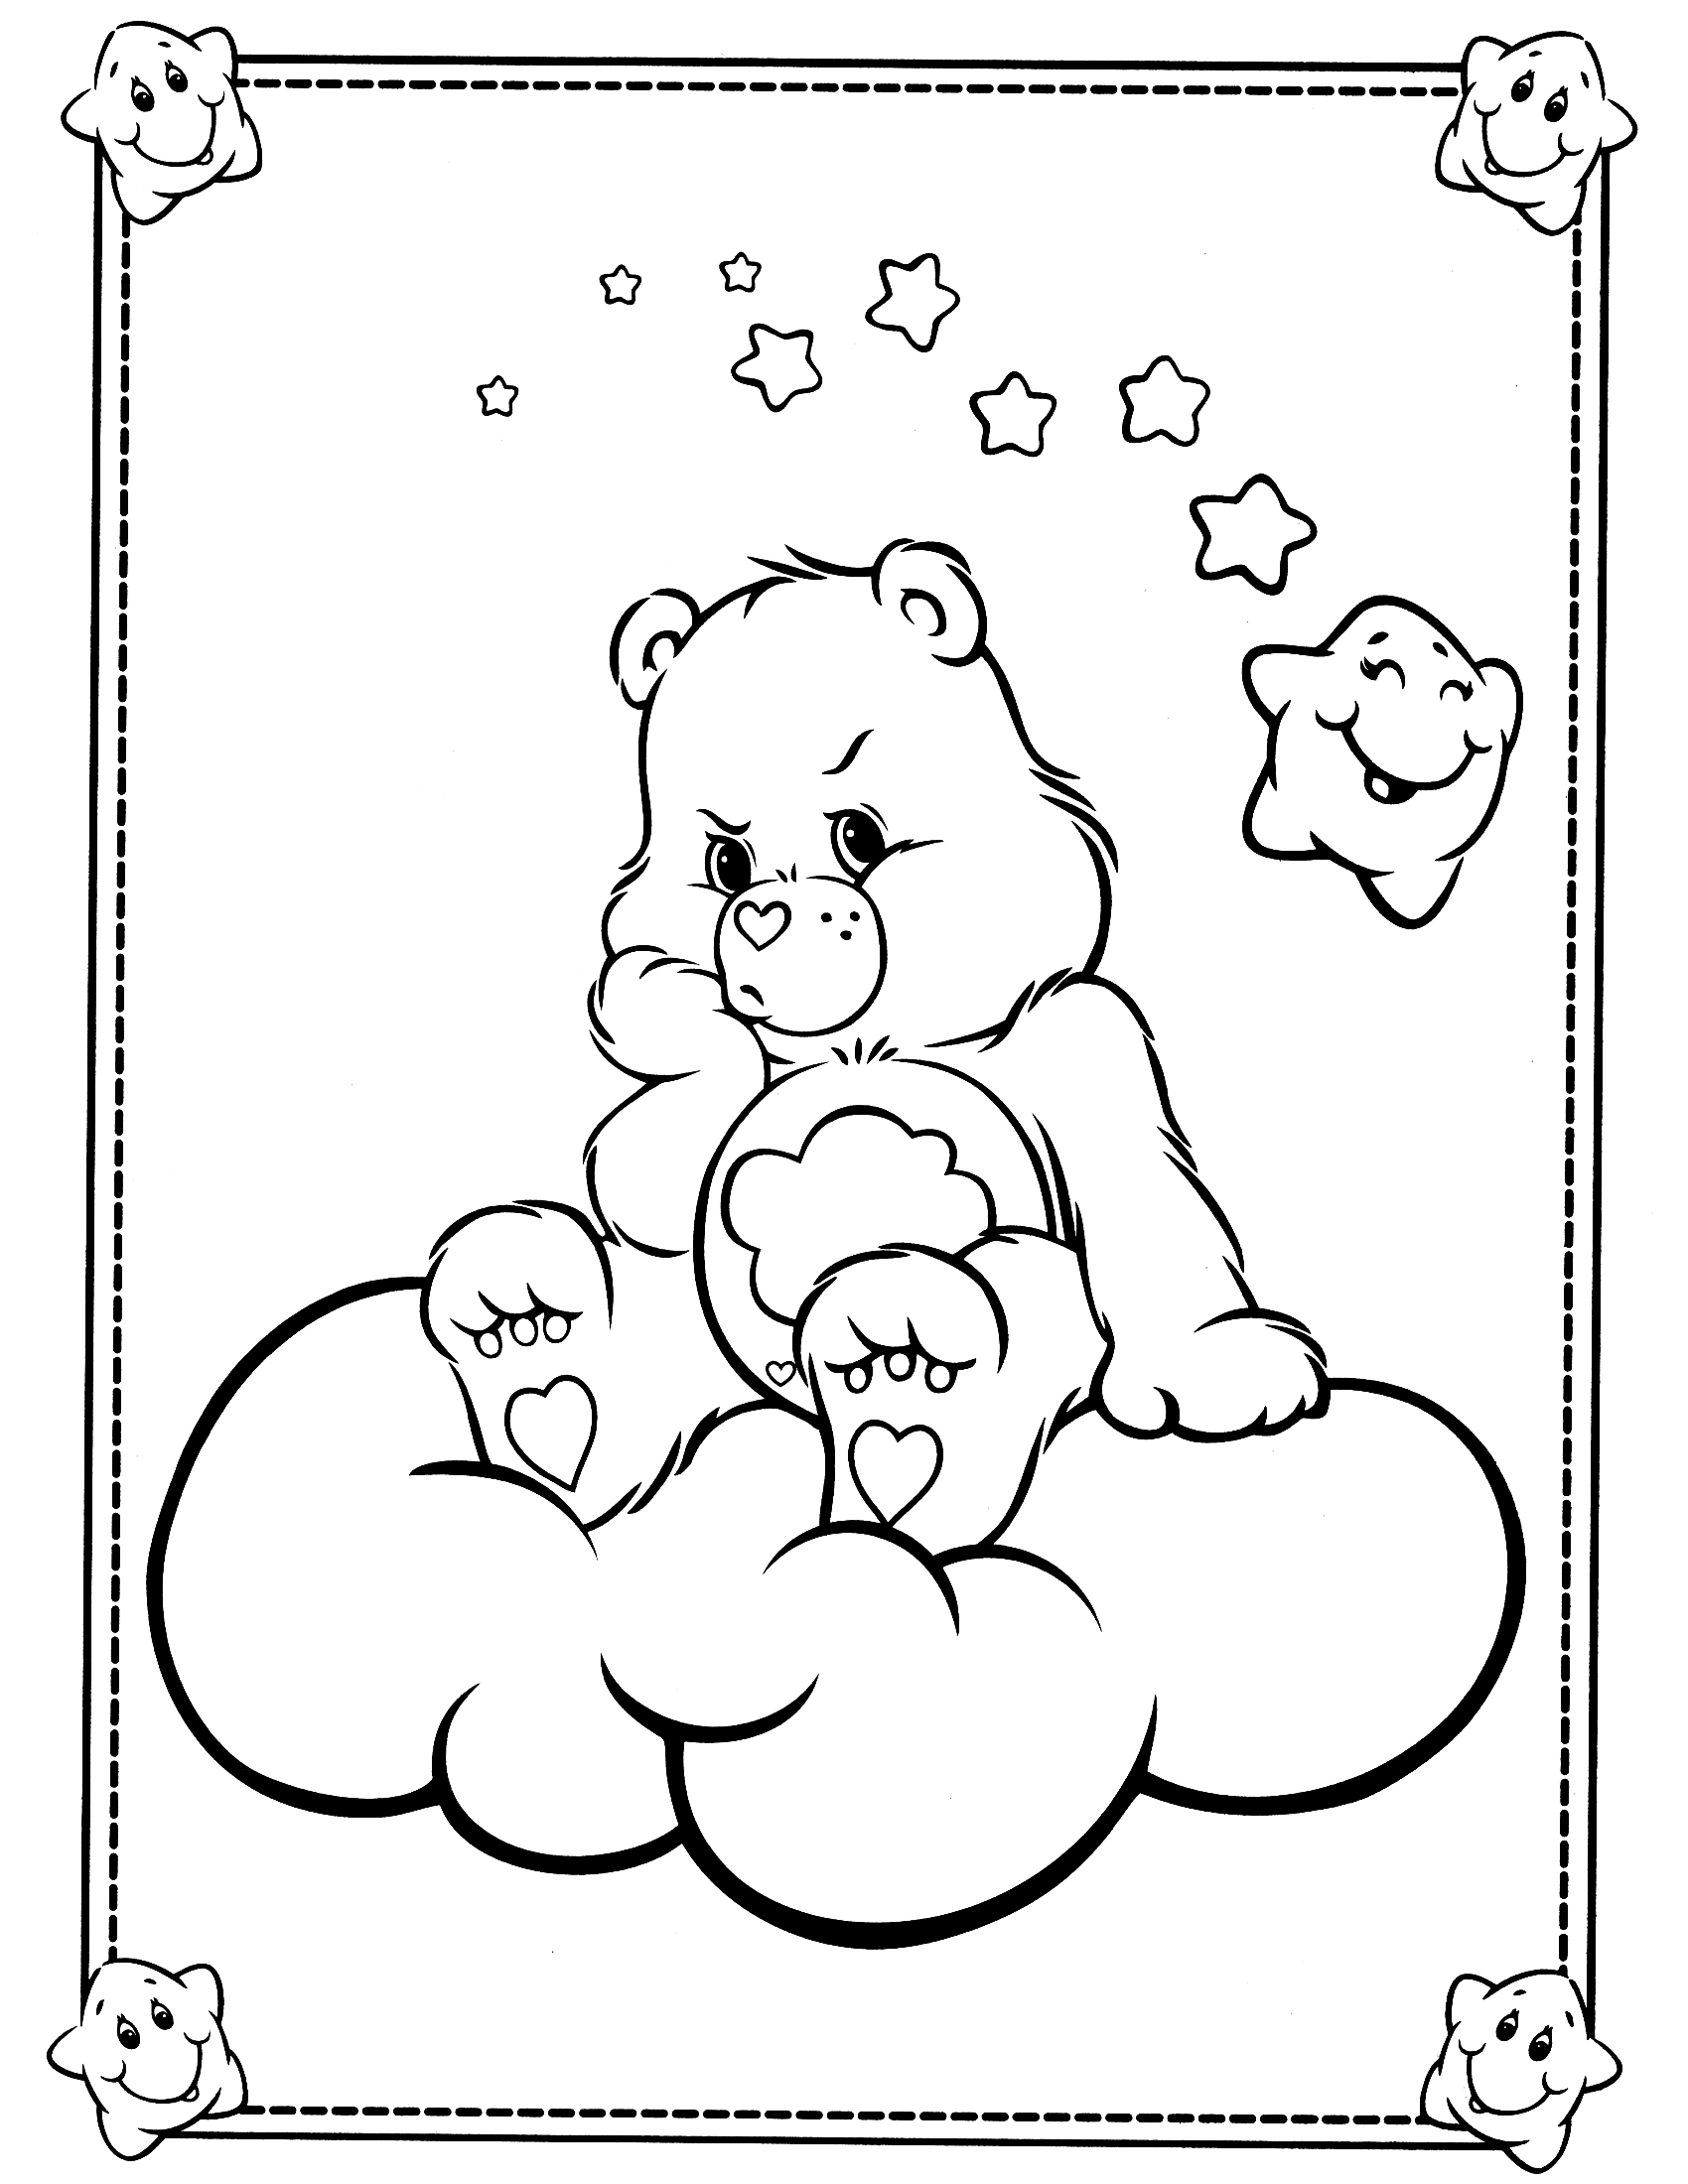 Care Bears #37224 (Cartoons) Free Printable Coloring Pages